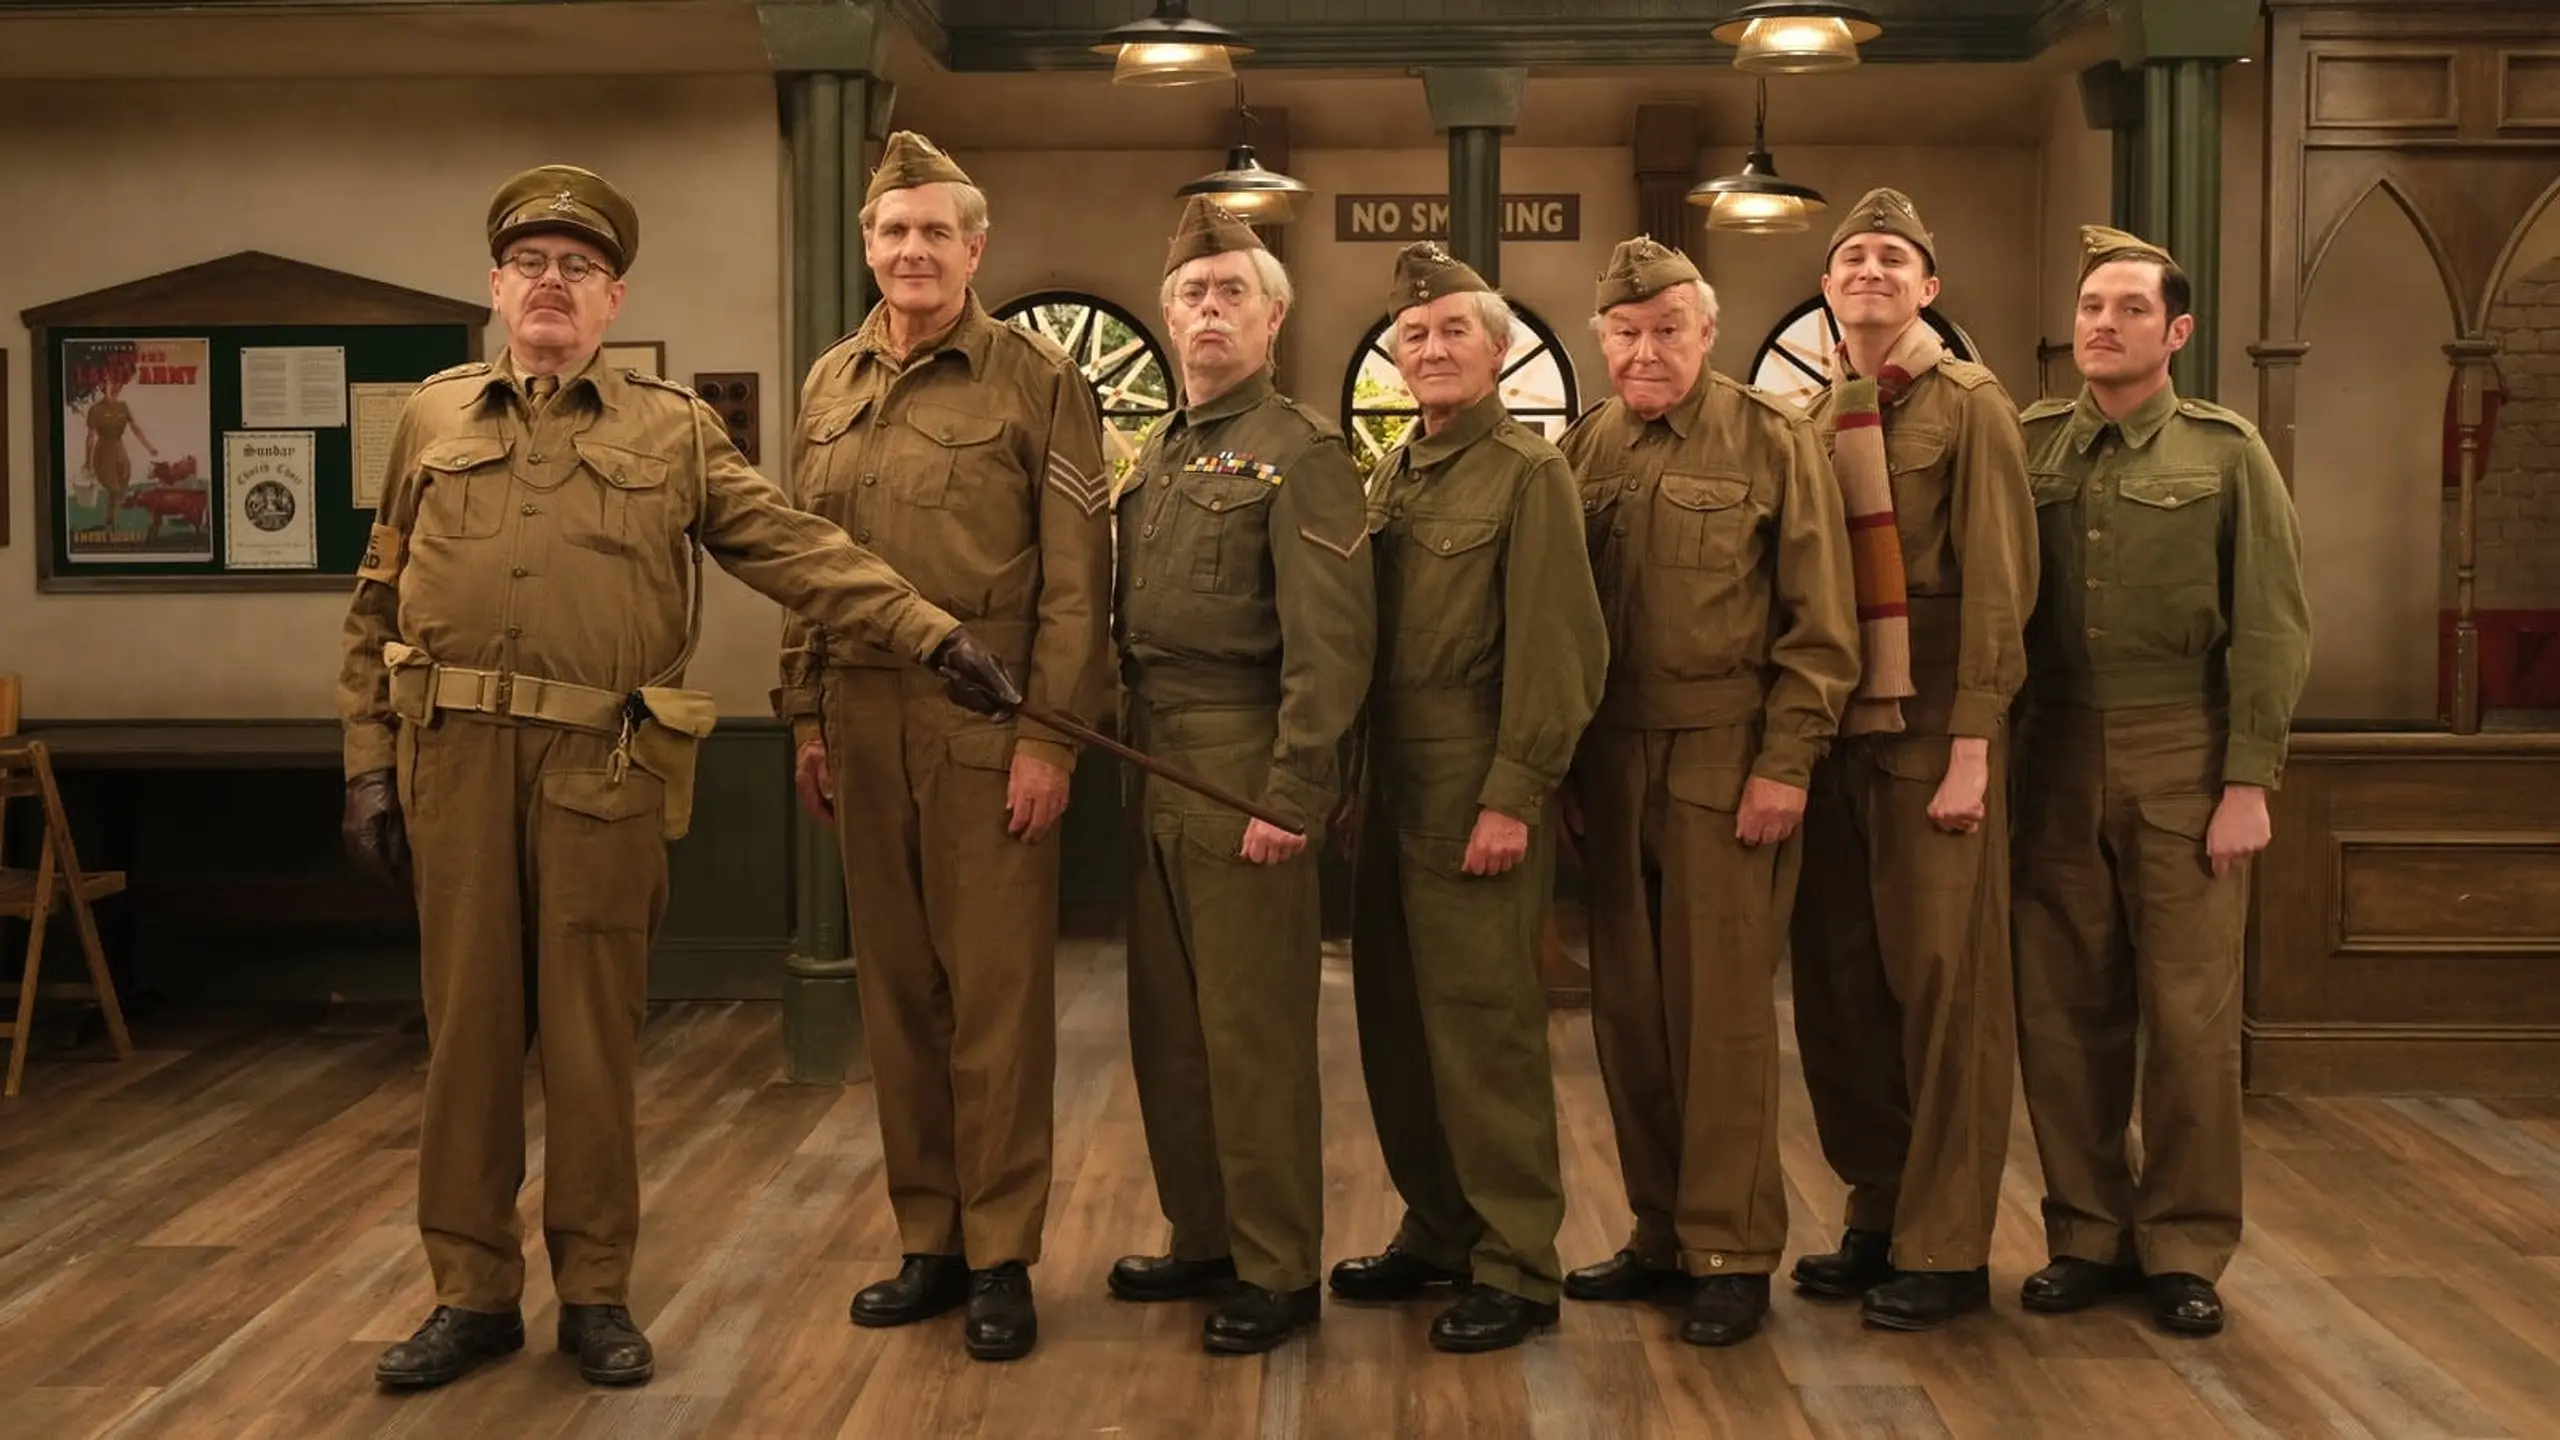 Dad's Army: The Lost Episodes